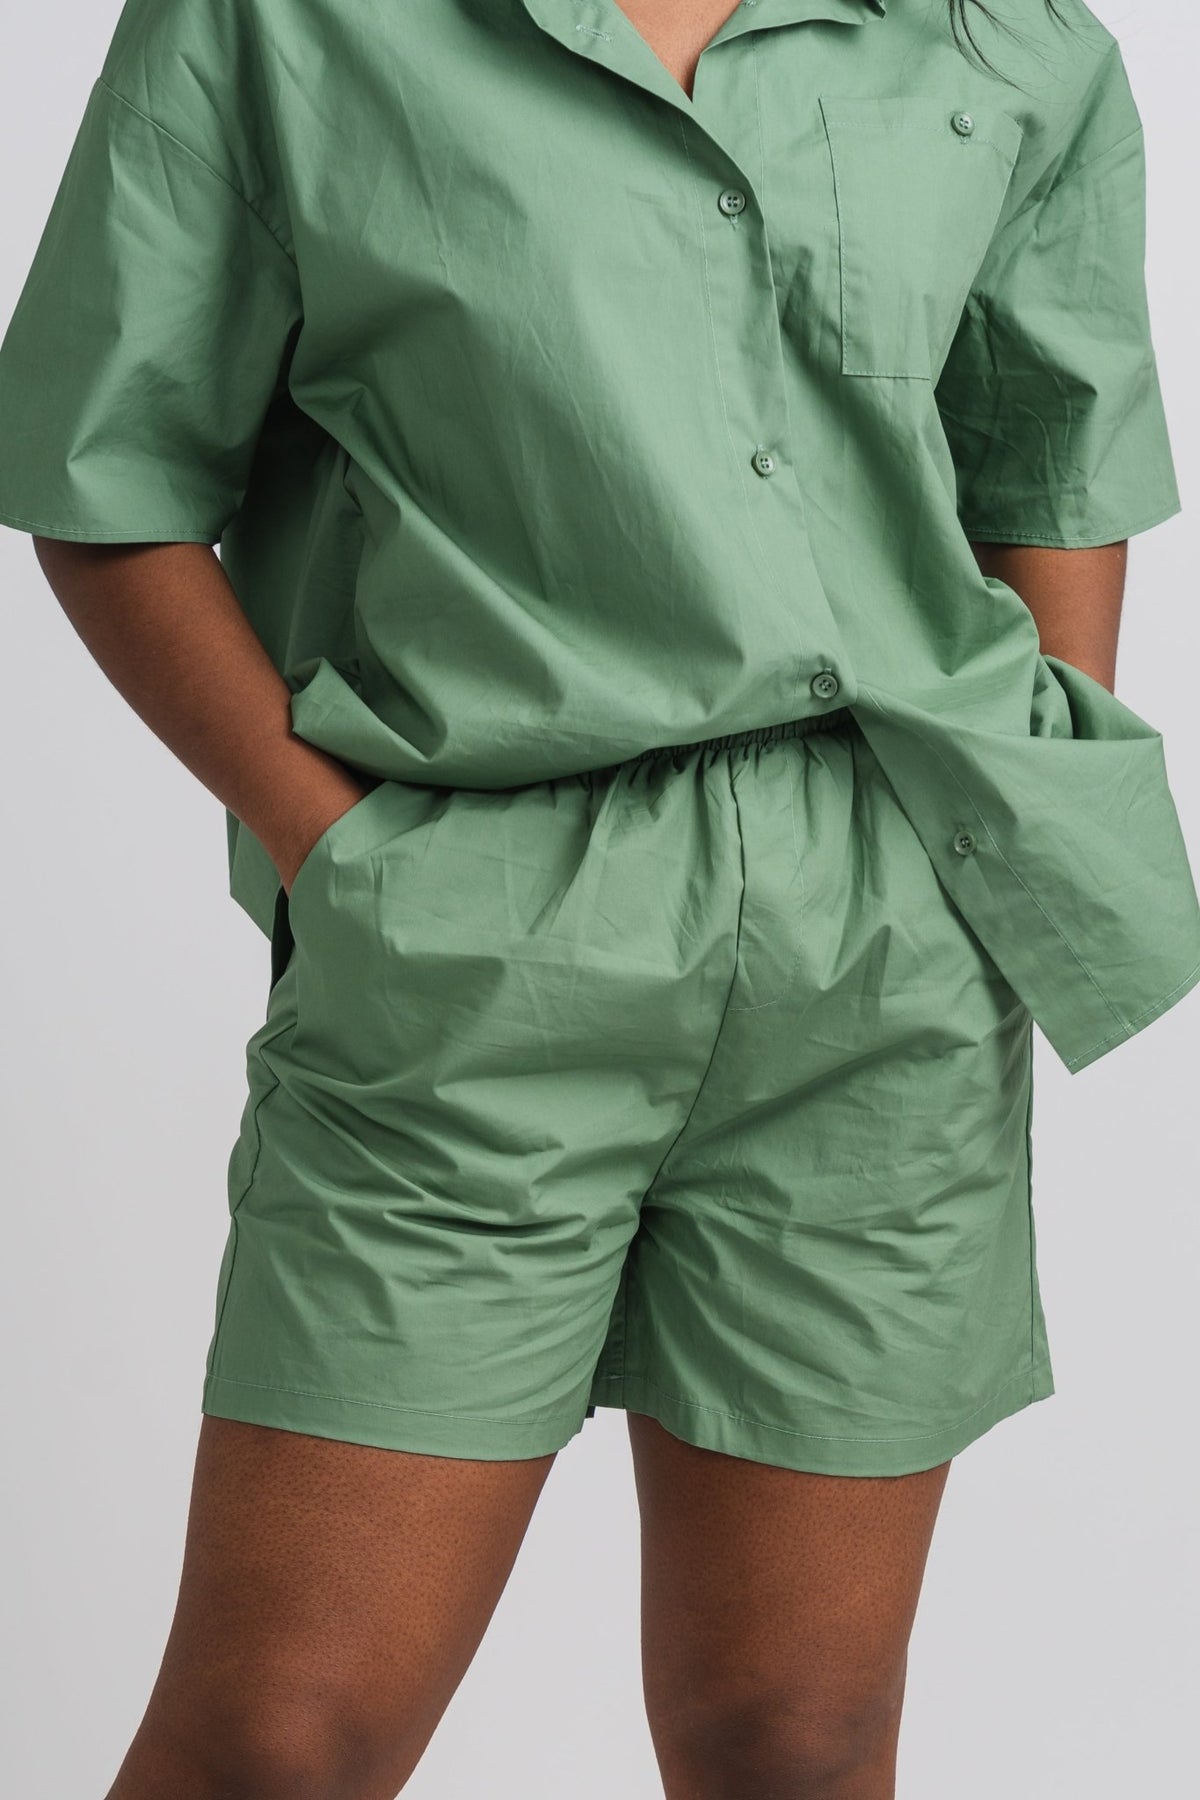 Elastic waist shorts green - Trendy Shorts - Cute Loungewear Collection at Lush Fashion Lounge Boutique in Oklahoma City